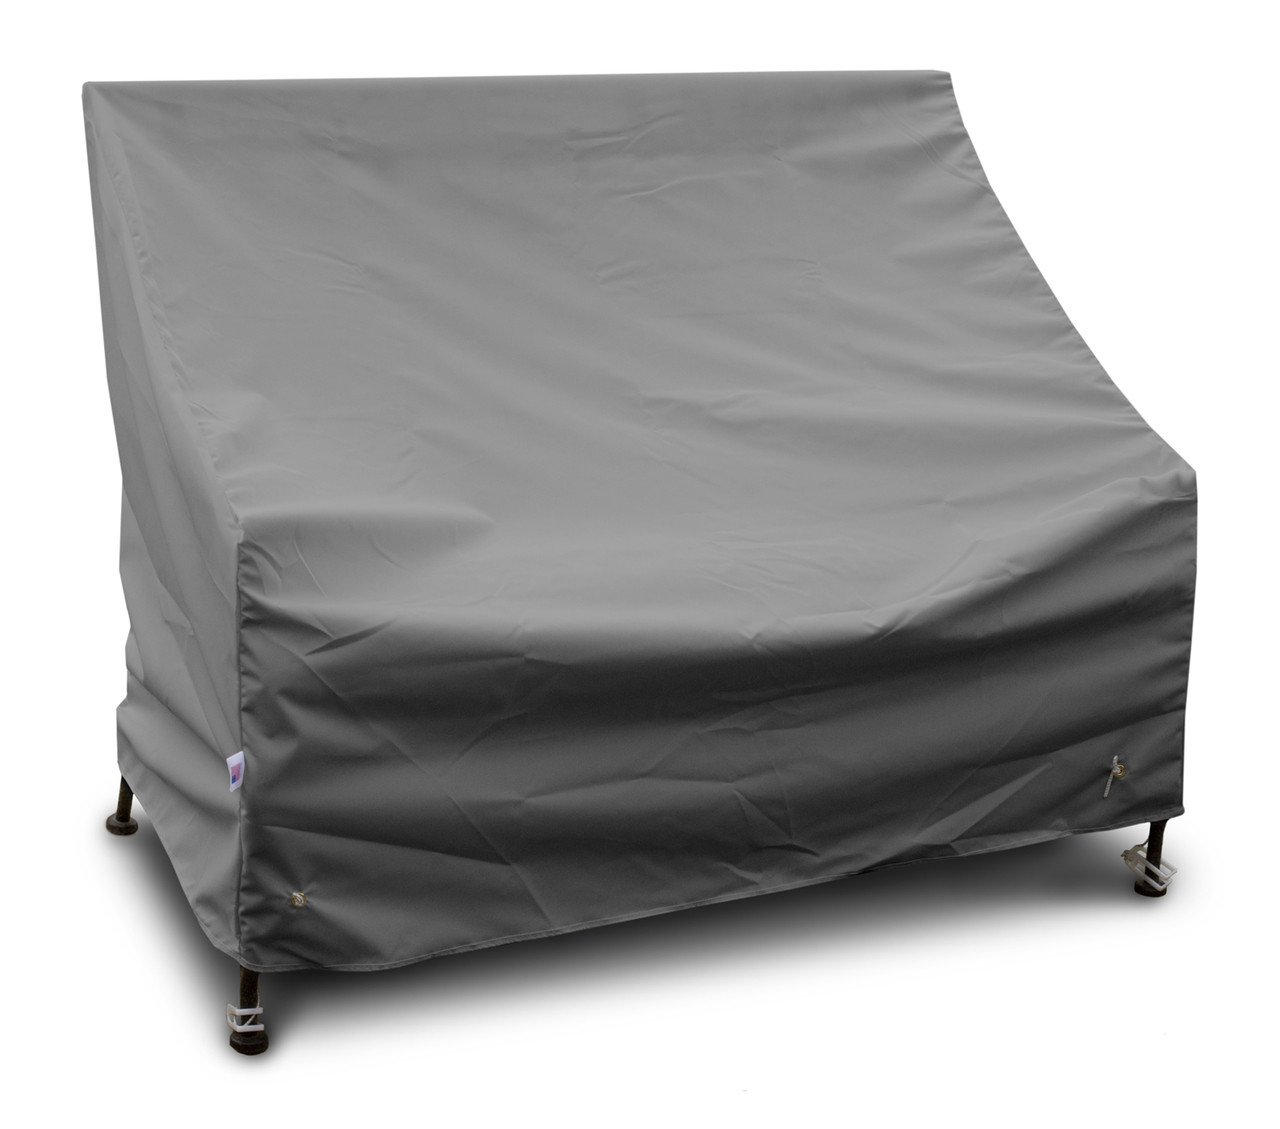 Bench and Glider Cover - 51W x 26D x 35H in.